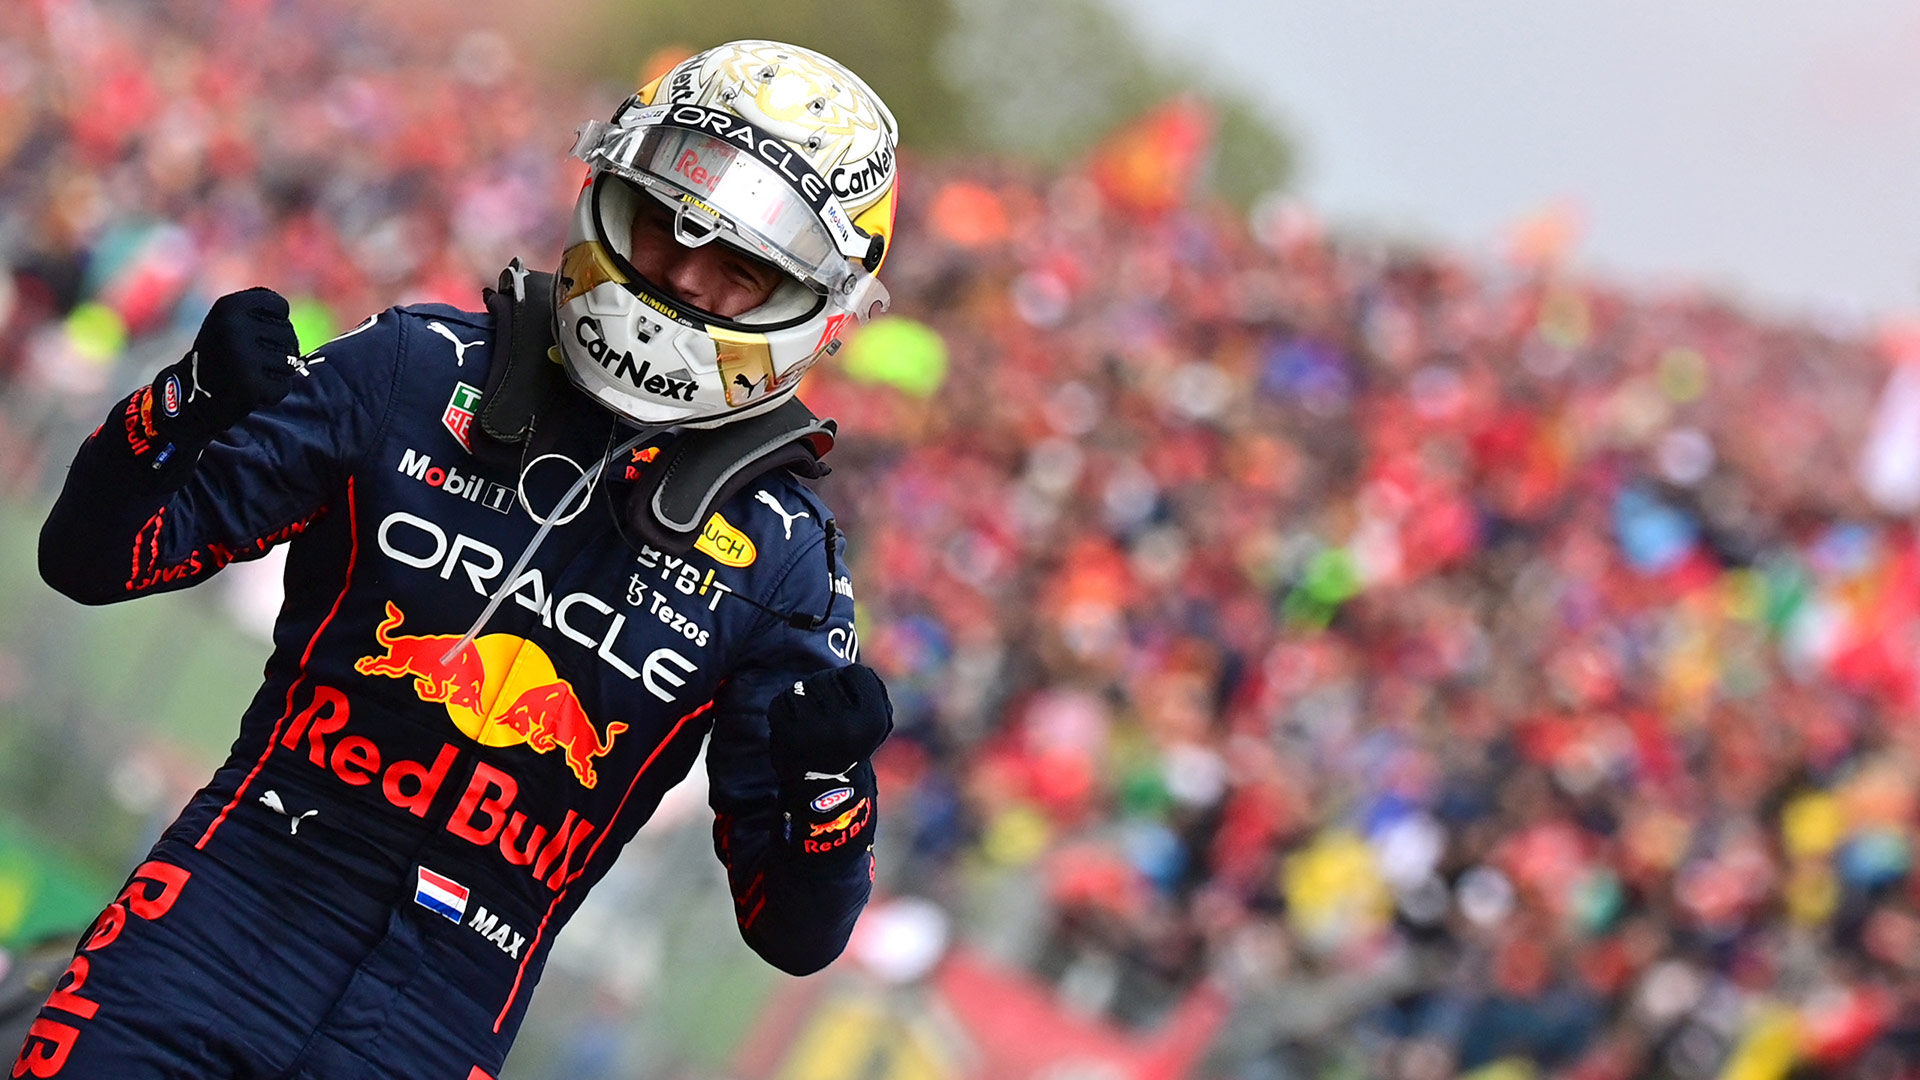 F1 Spanish Grand Prix live stream — how to watch the race for free and online